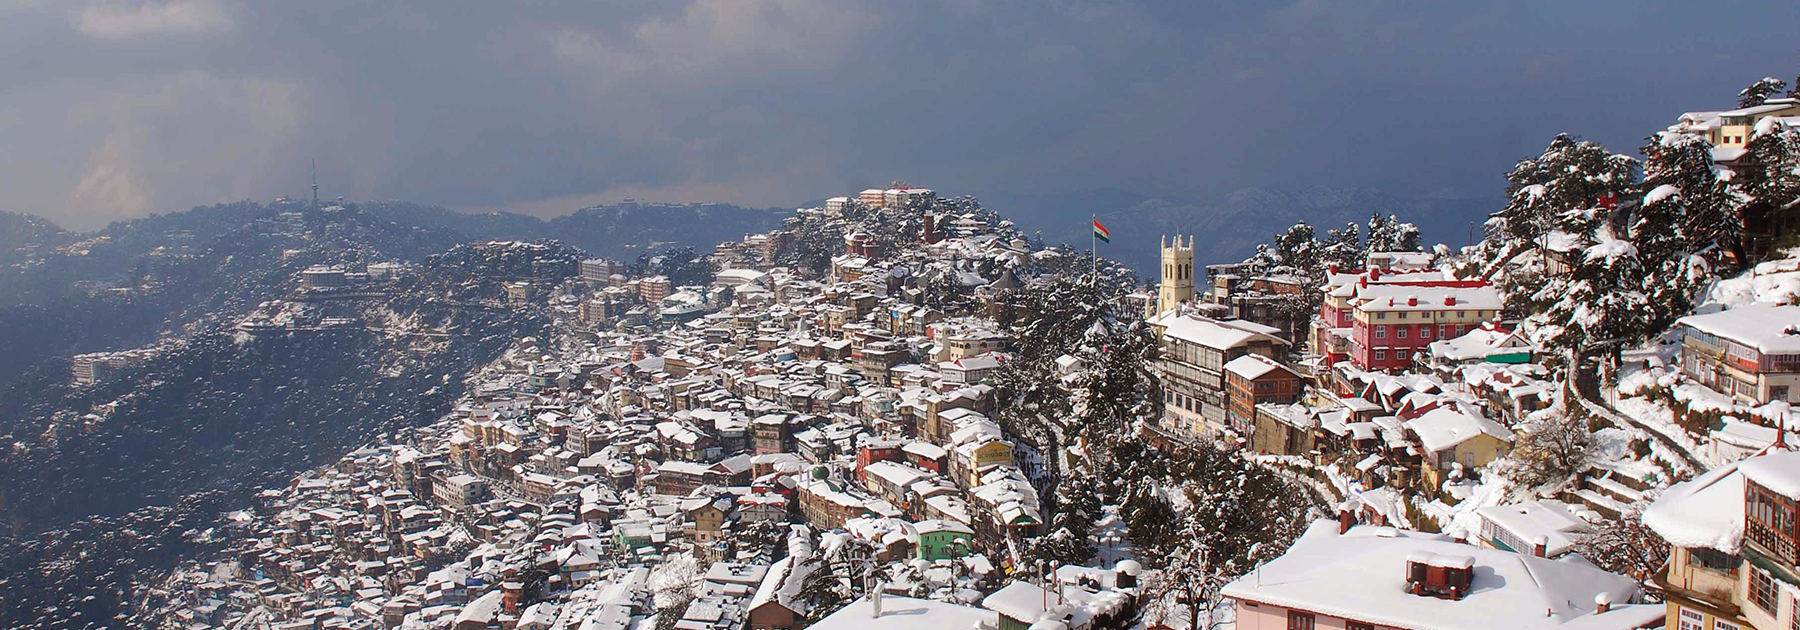 Snow lies on rooftops in Shimla, after heavy winter showers. (STR/AFP/Getty Images)